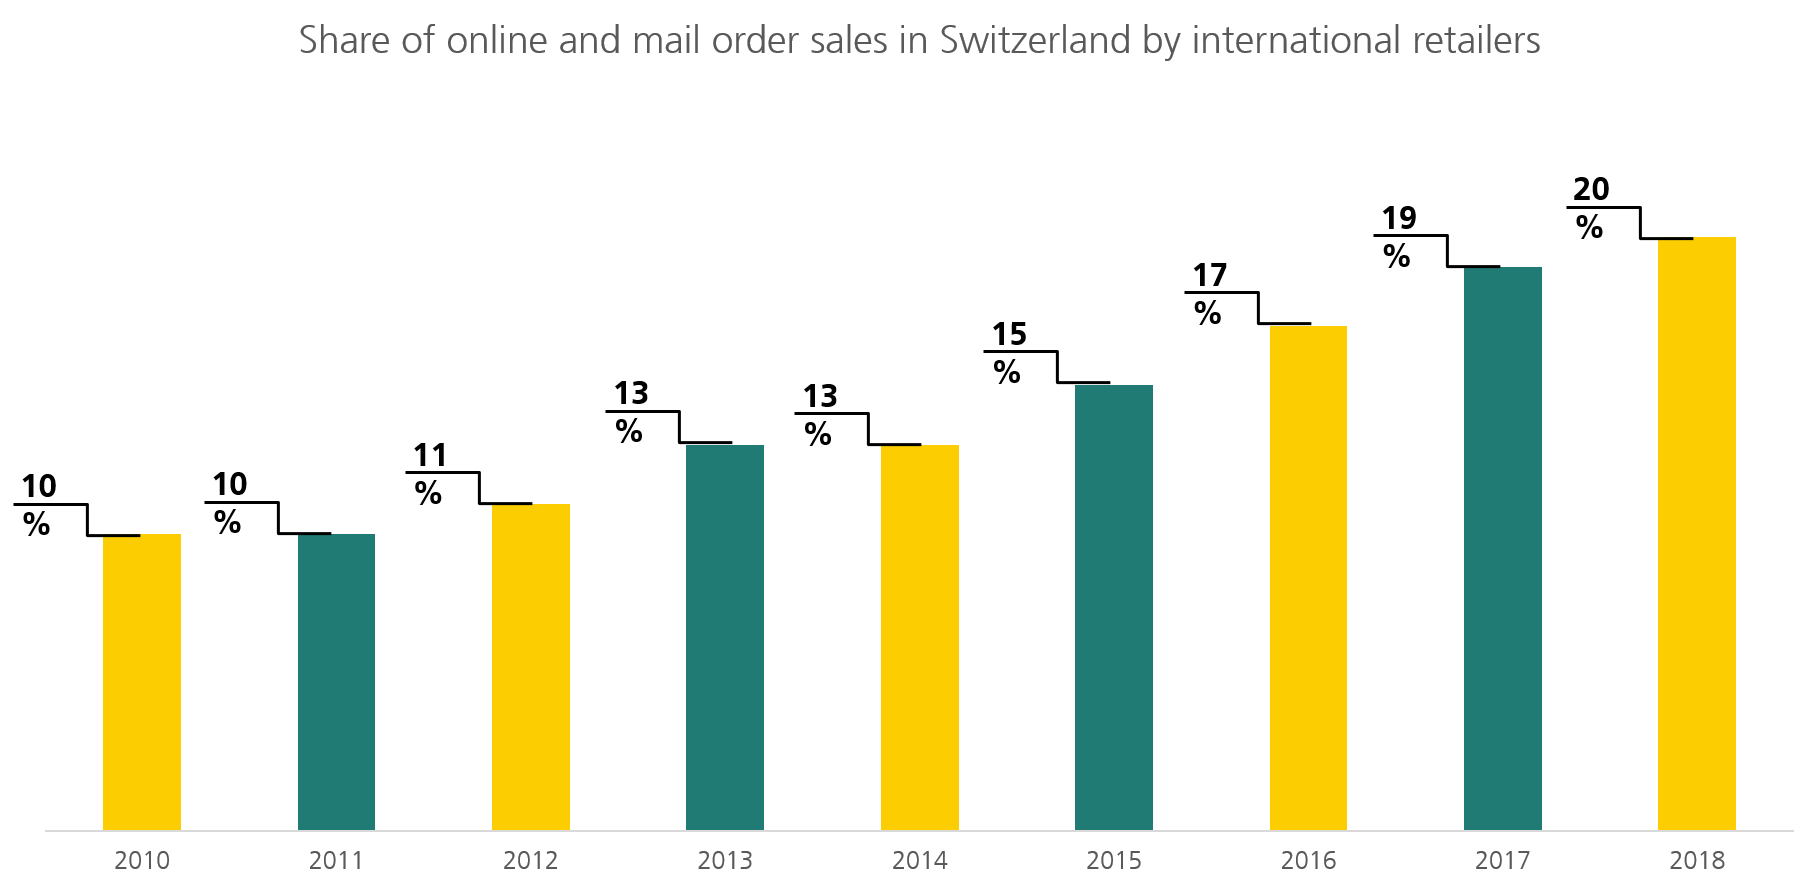 Share of online and mail order sales in Switzerland by international retailers